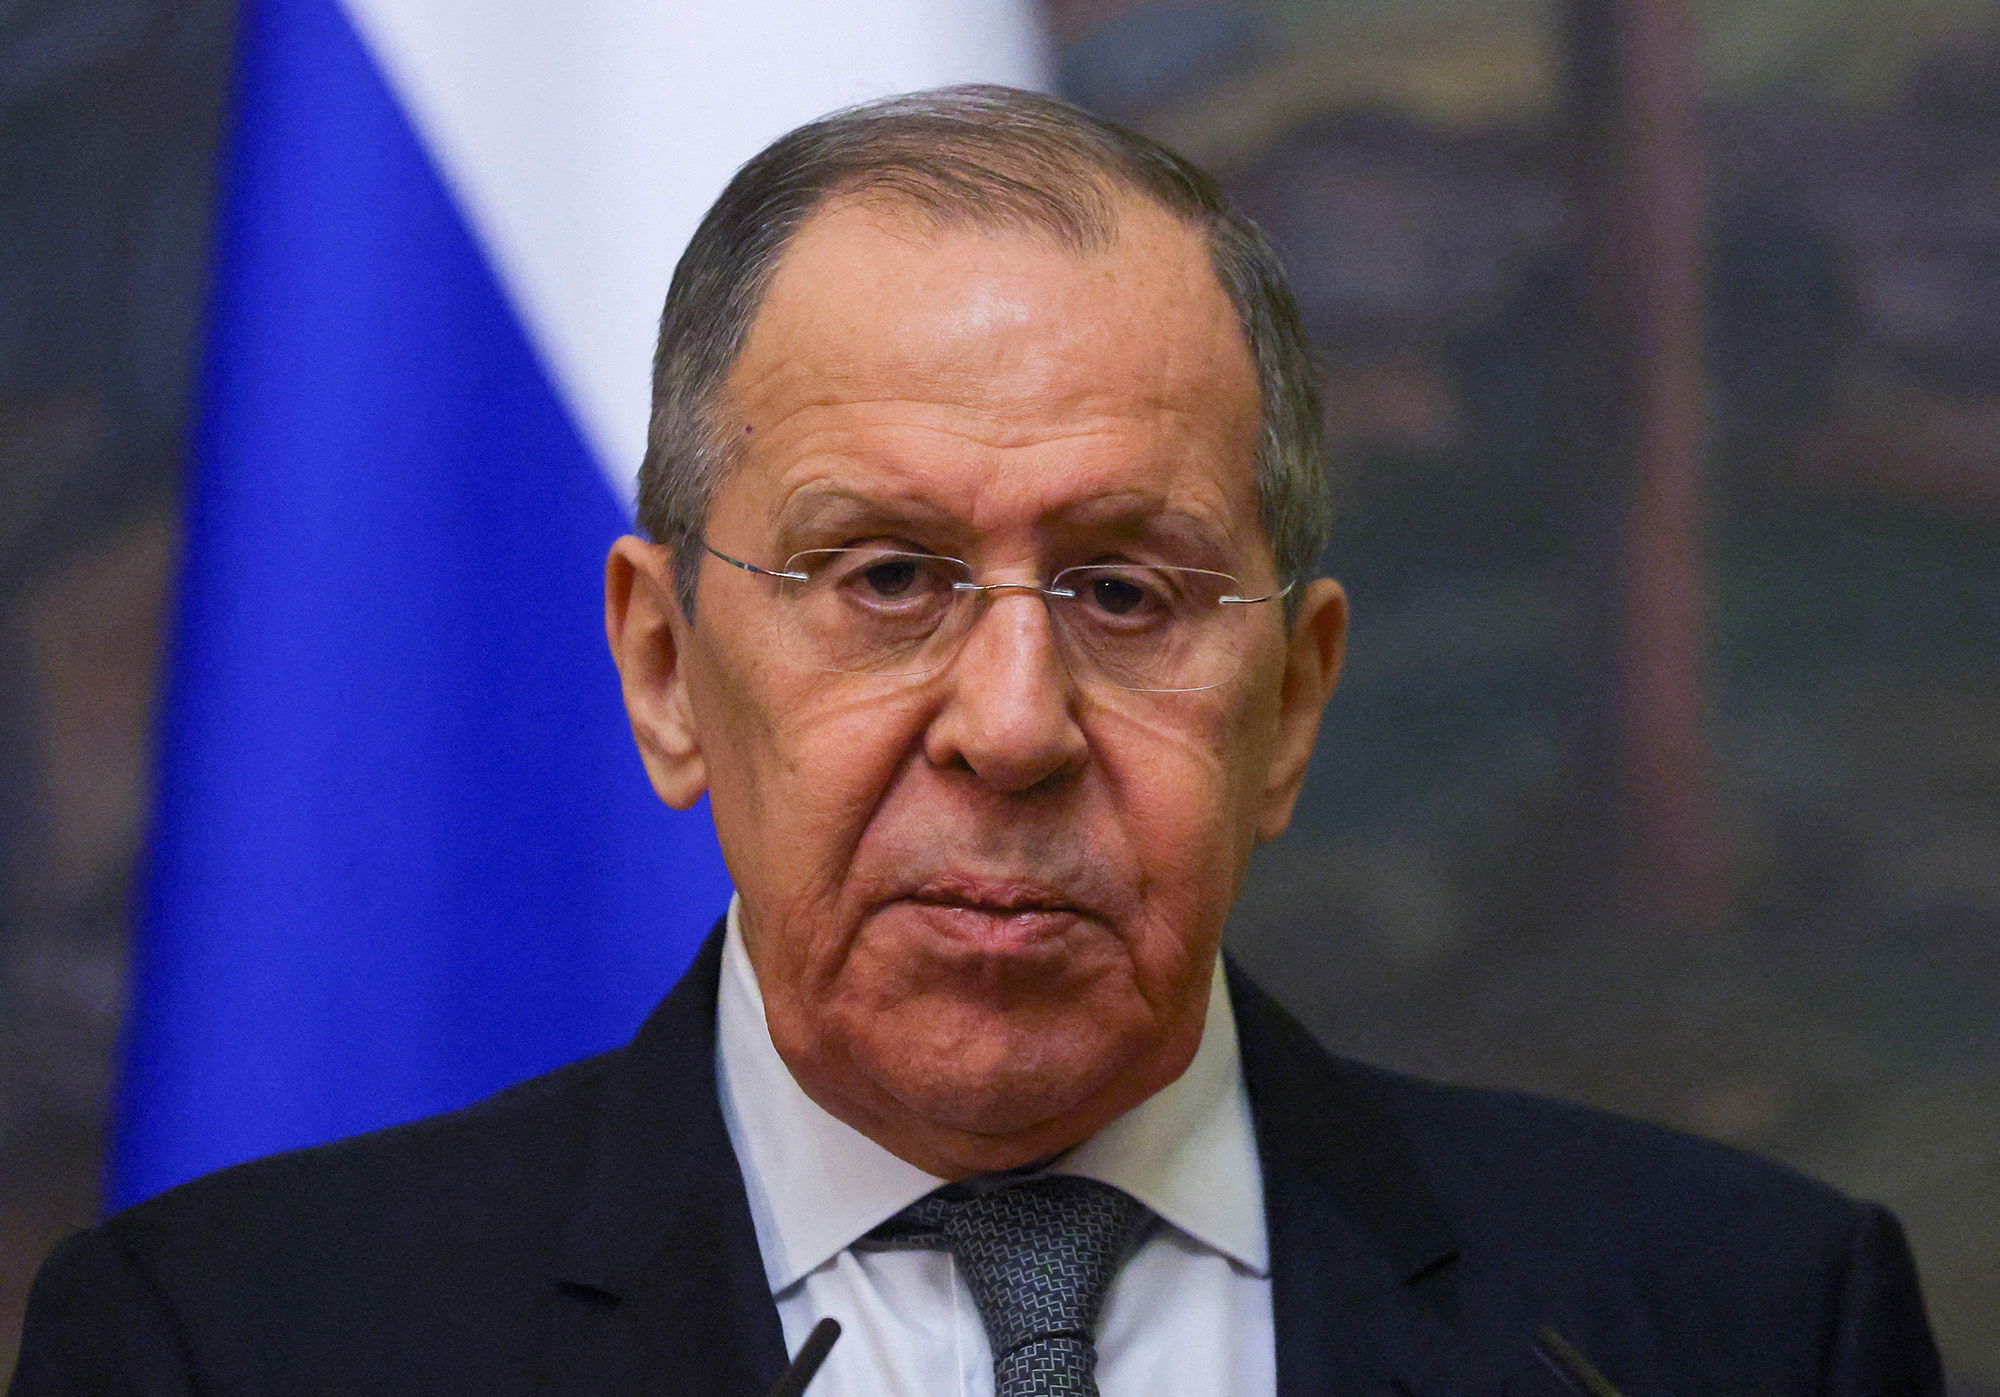 Russia's Foreign Minister Sergei Lavrov speaks during a news conference March 17 in Moscow, Russia.